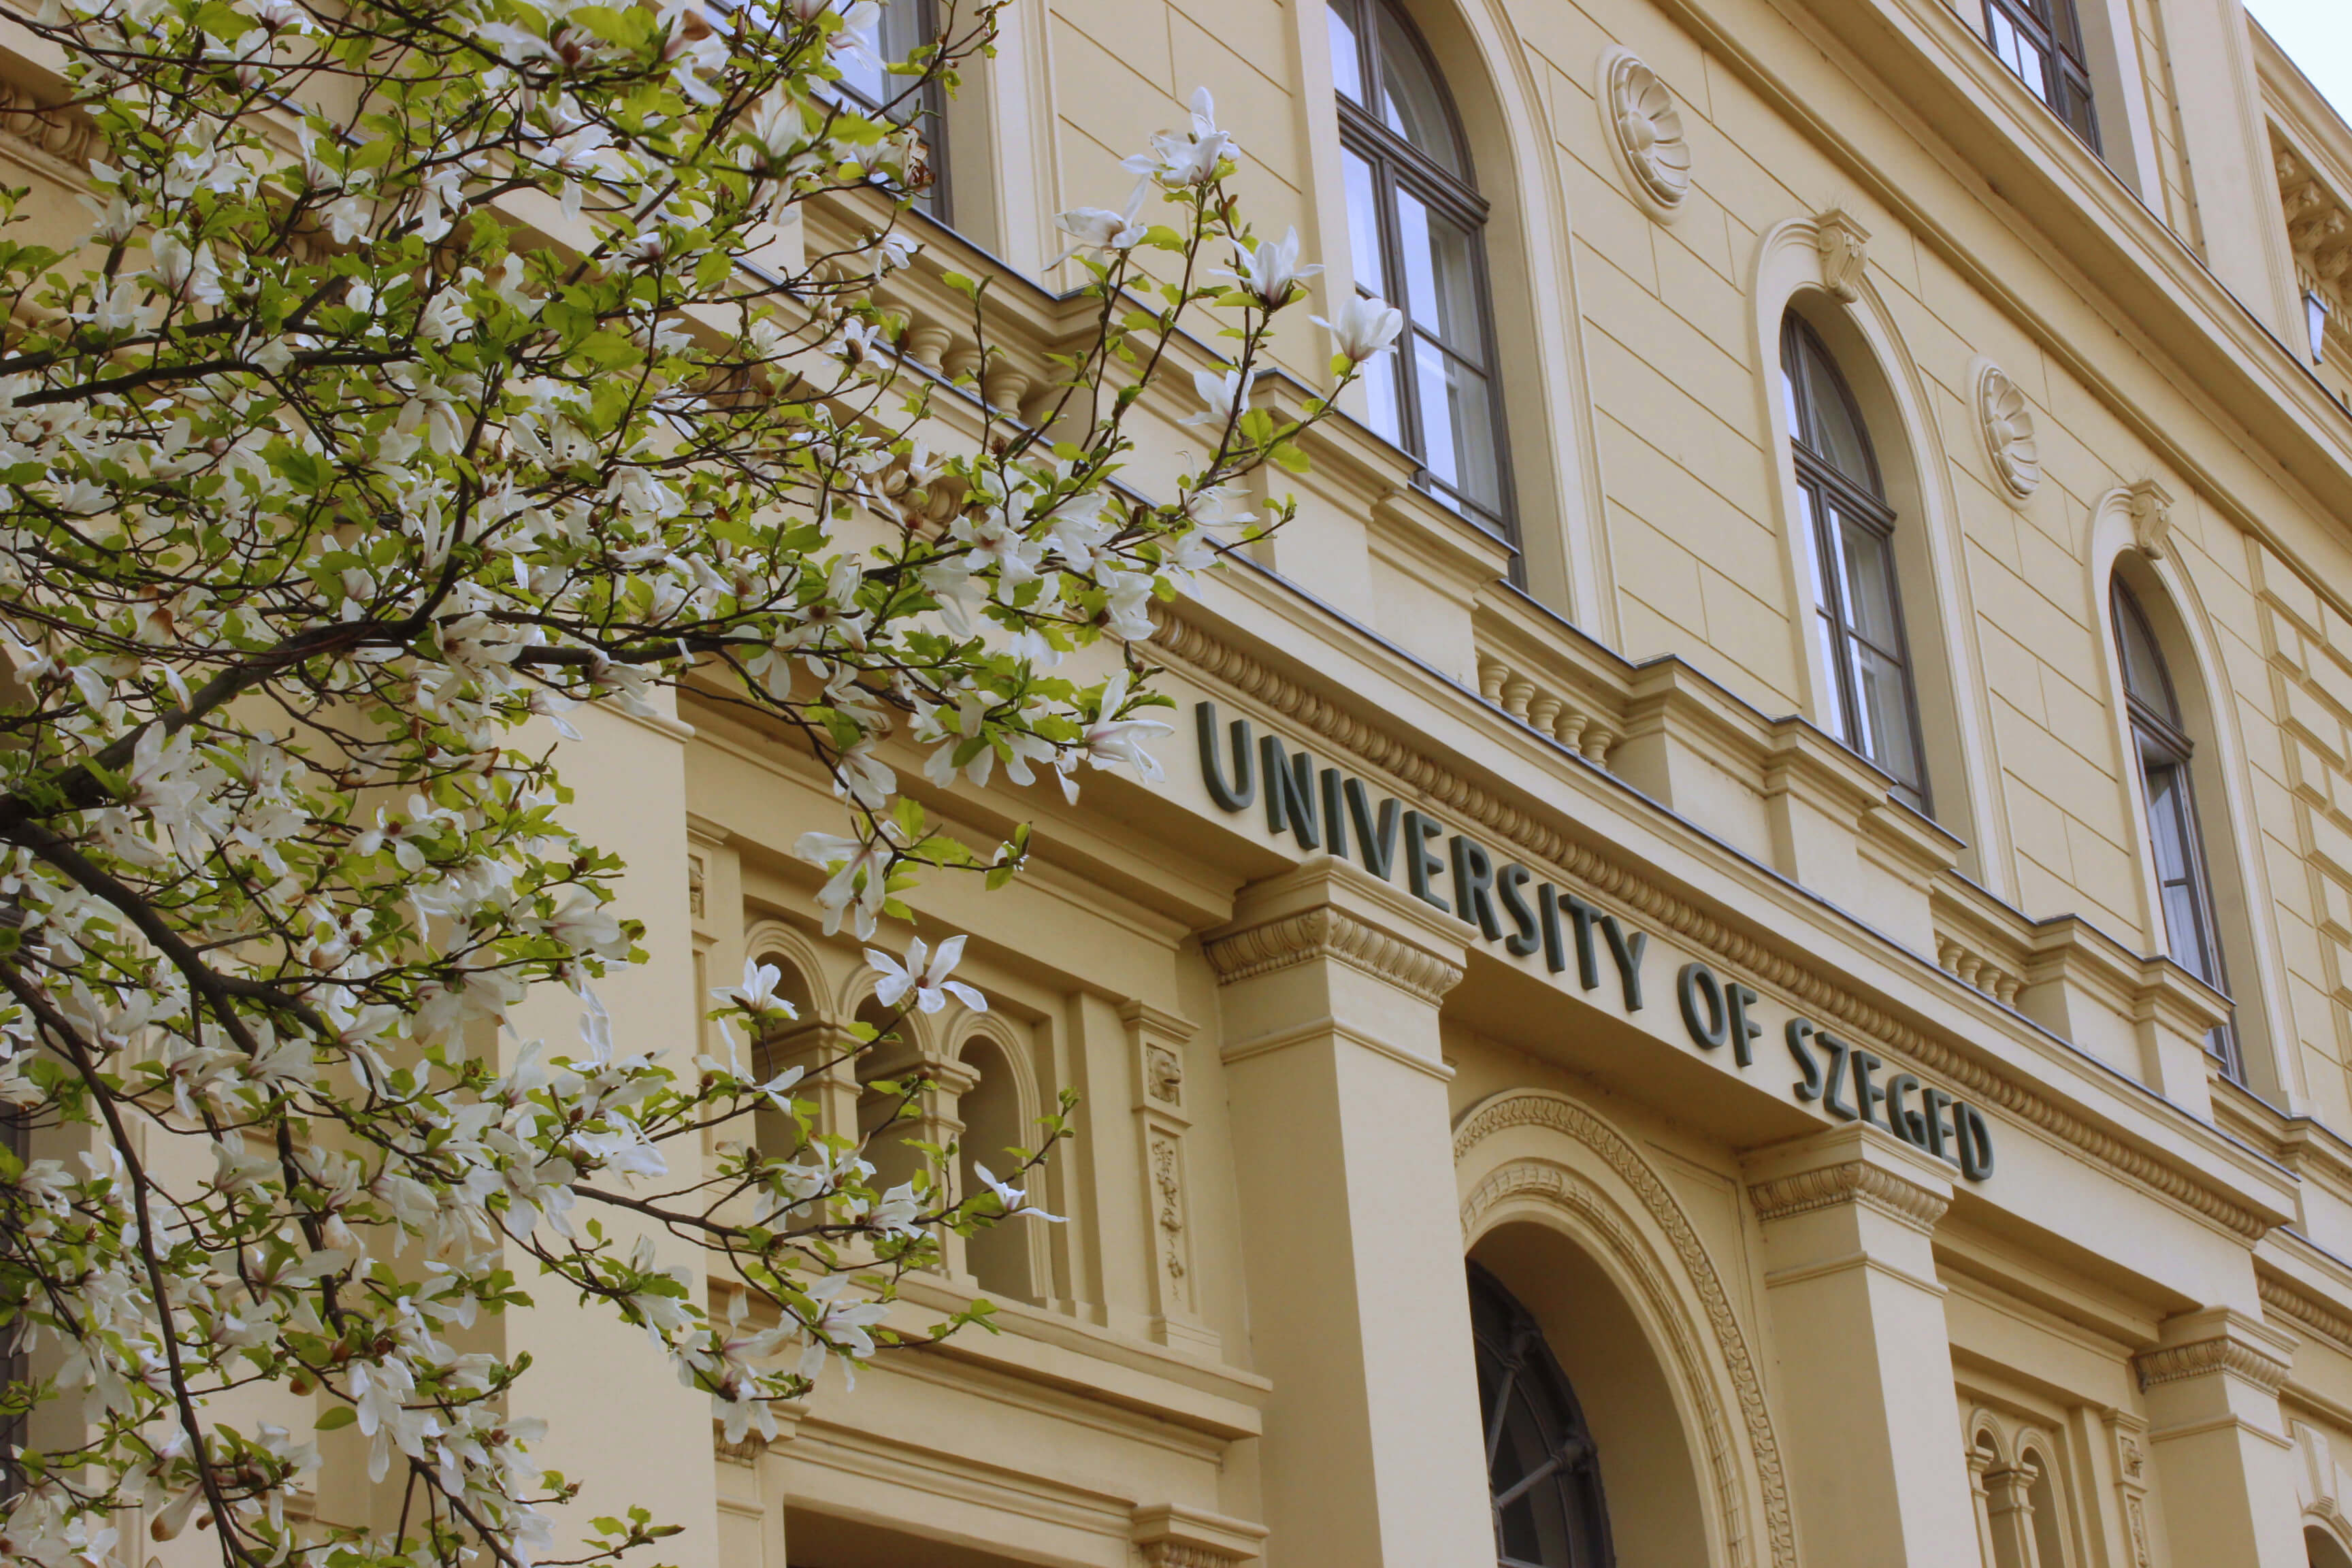 University of Szeged in Hungary offers a world-class degree in medicine 